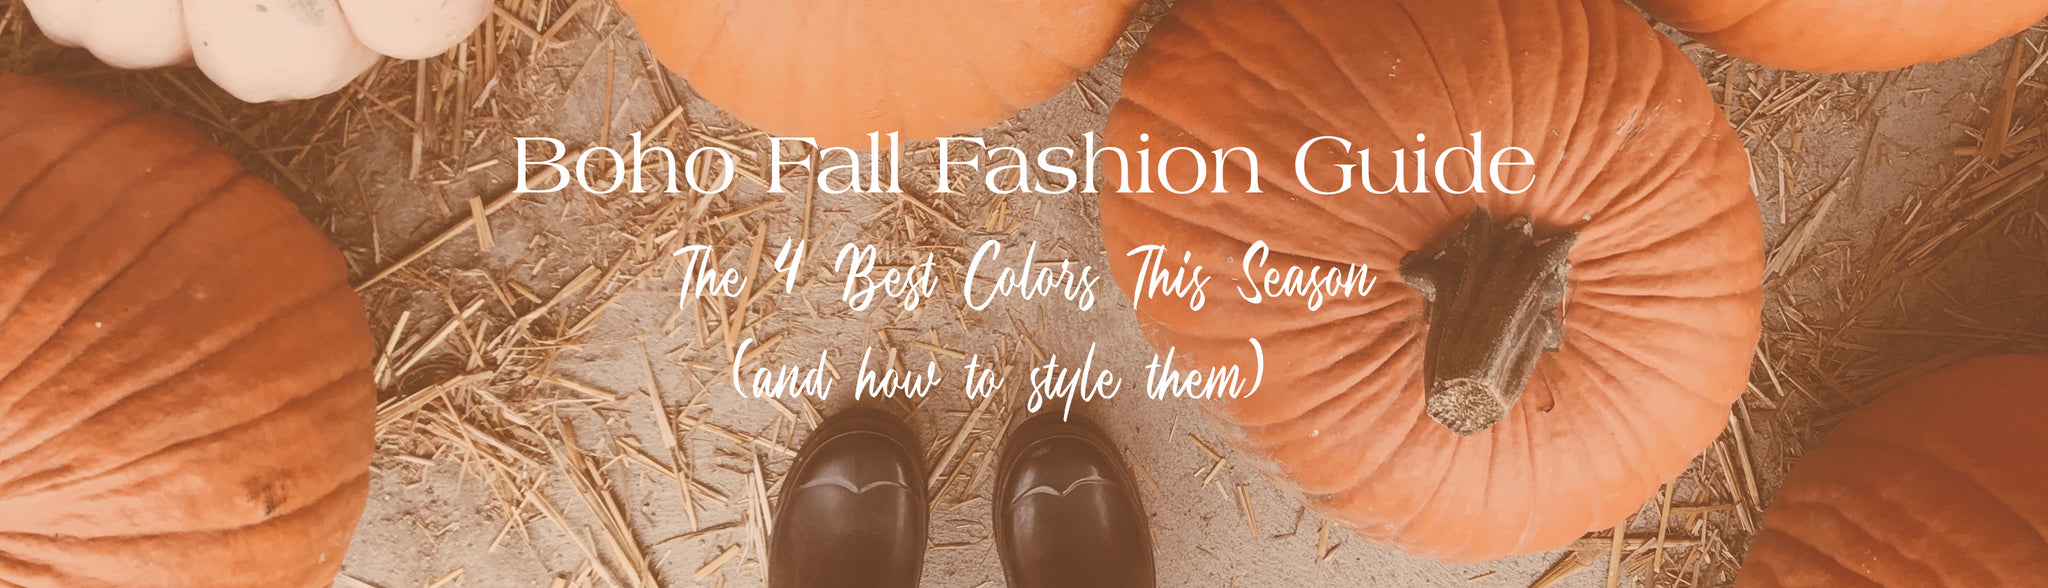 boho fall fashion guide best colors for fall outfit inspo